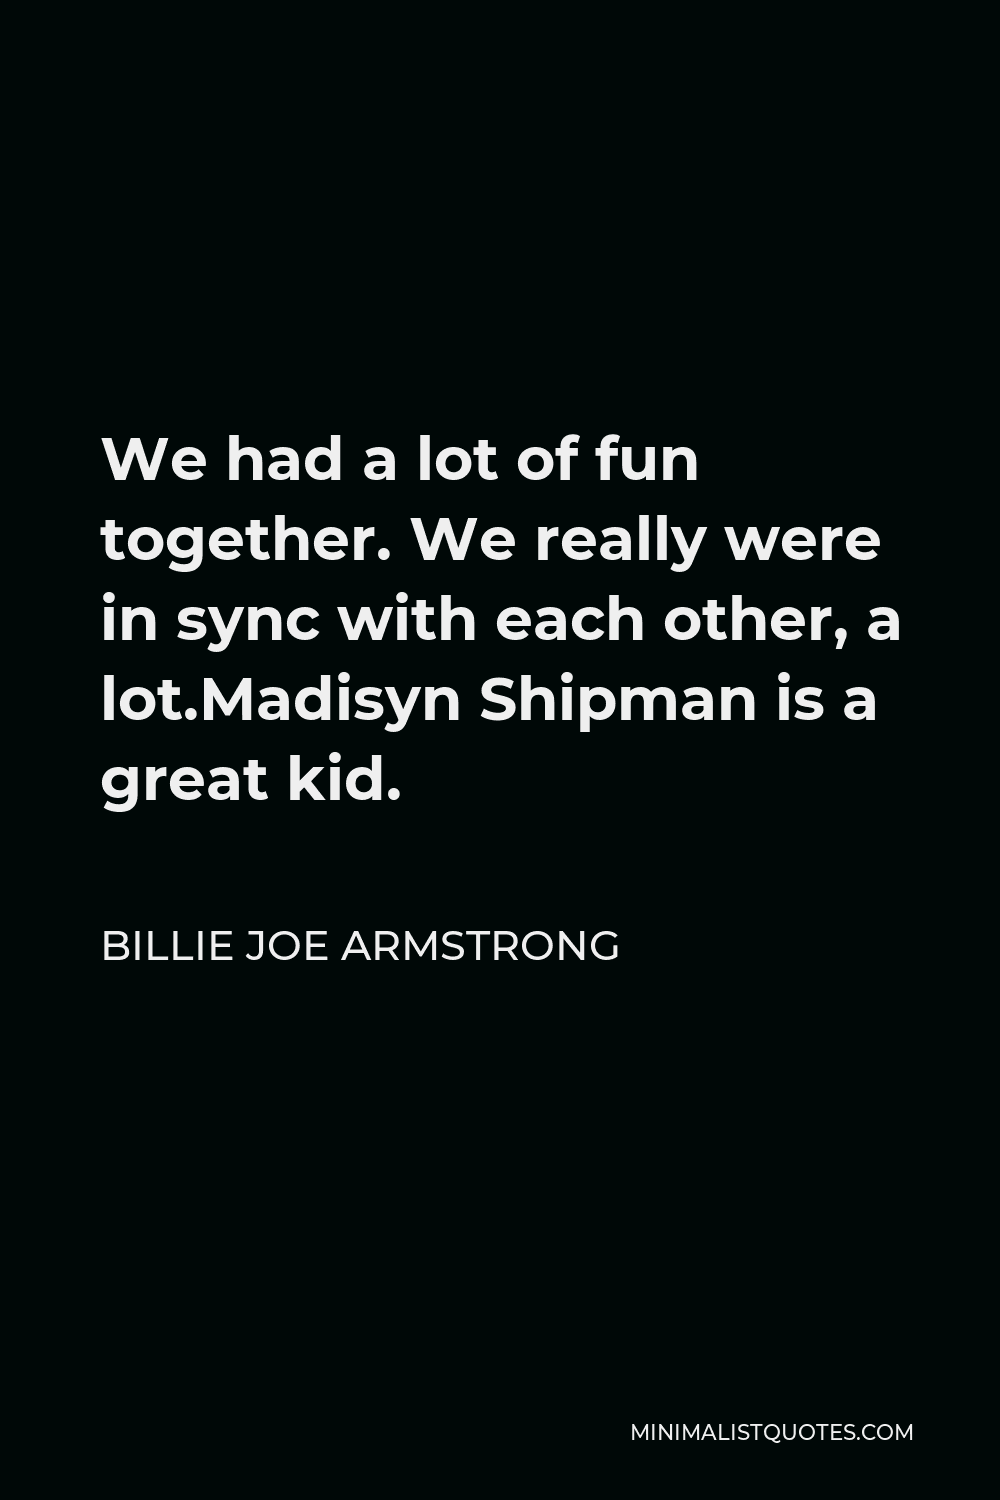 Billie Joe Armstrong Quote - We had a lot of fun together. We really were in sync with each other, a lot.Madisyn Shipman is a great kid.